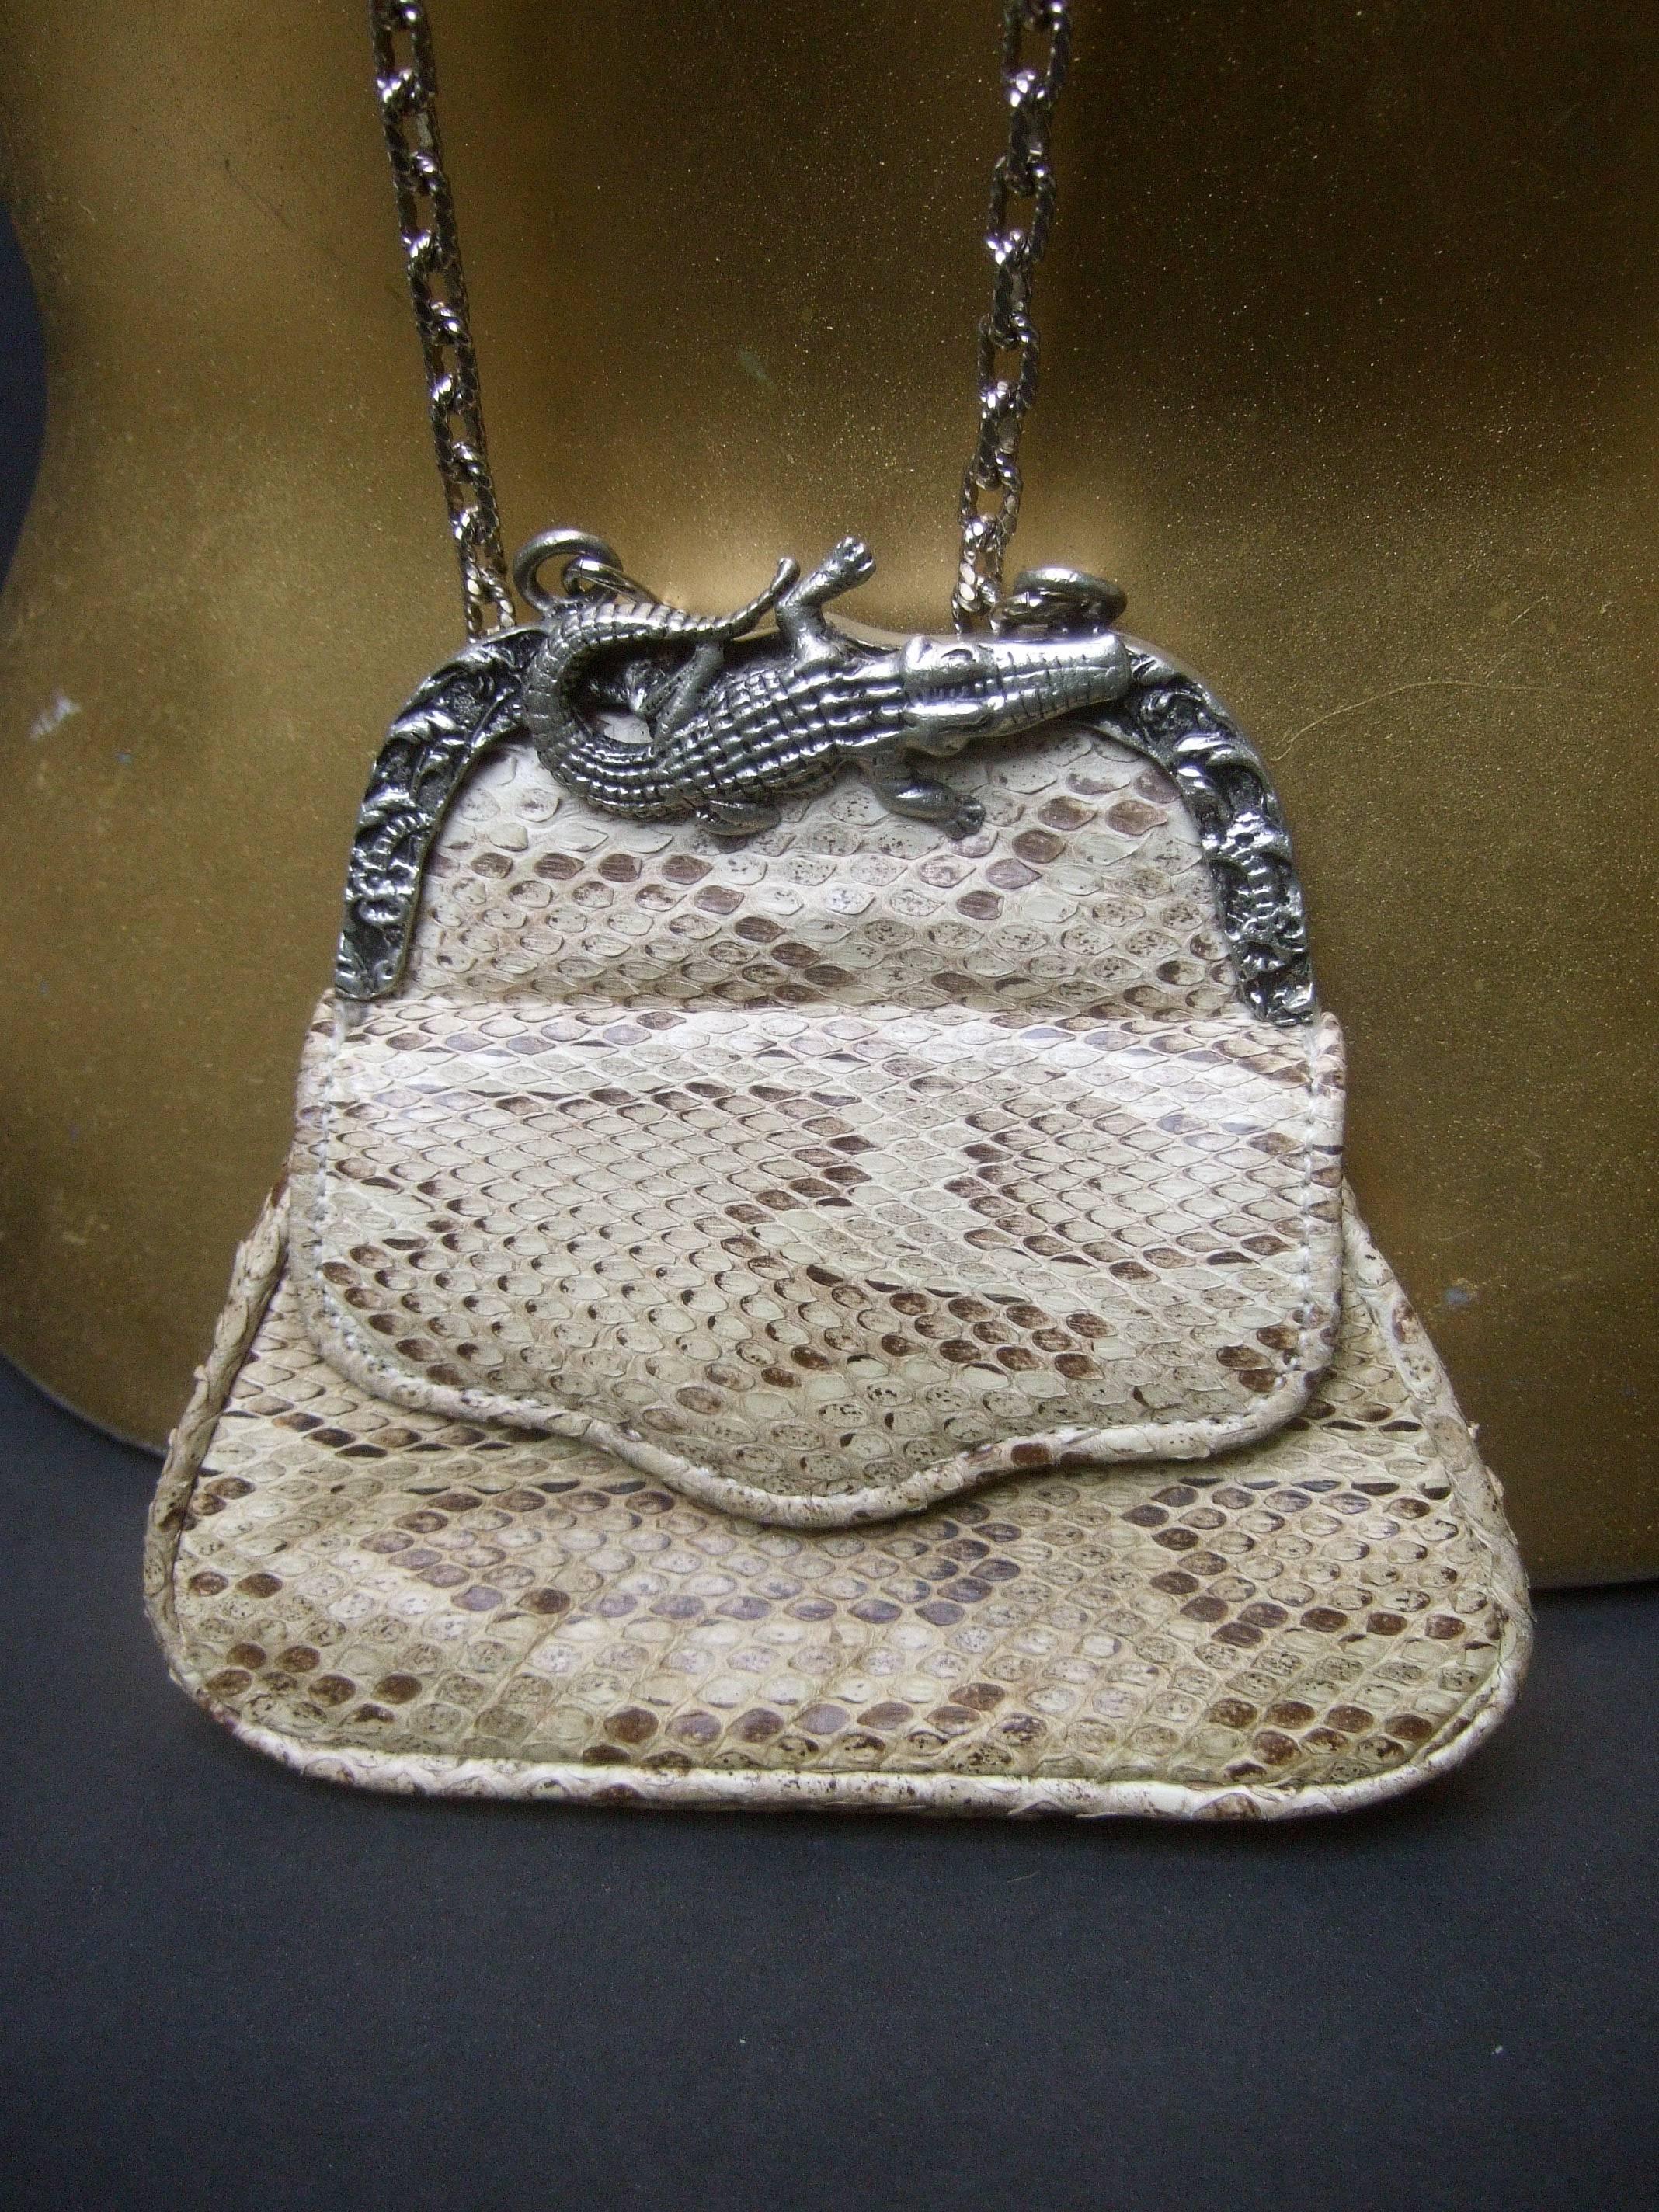 Diminutive python alligator emblem tiny pouch purse
The unique small purse is covered with exotic 
python skin on both exterior sides 

The pewter tone metal clasp frame is adorned with 
an alligator emblem. The tiny coin size purse hangs
from